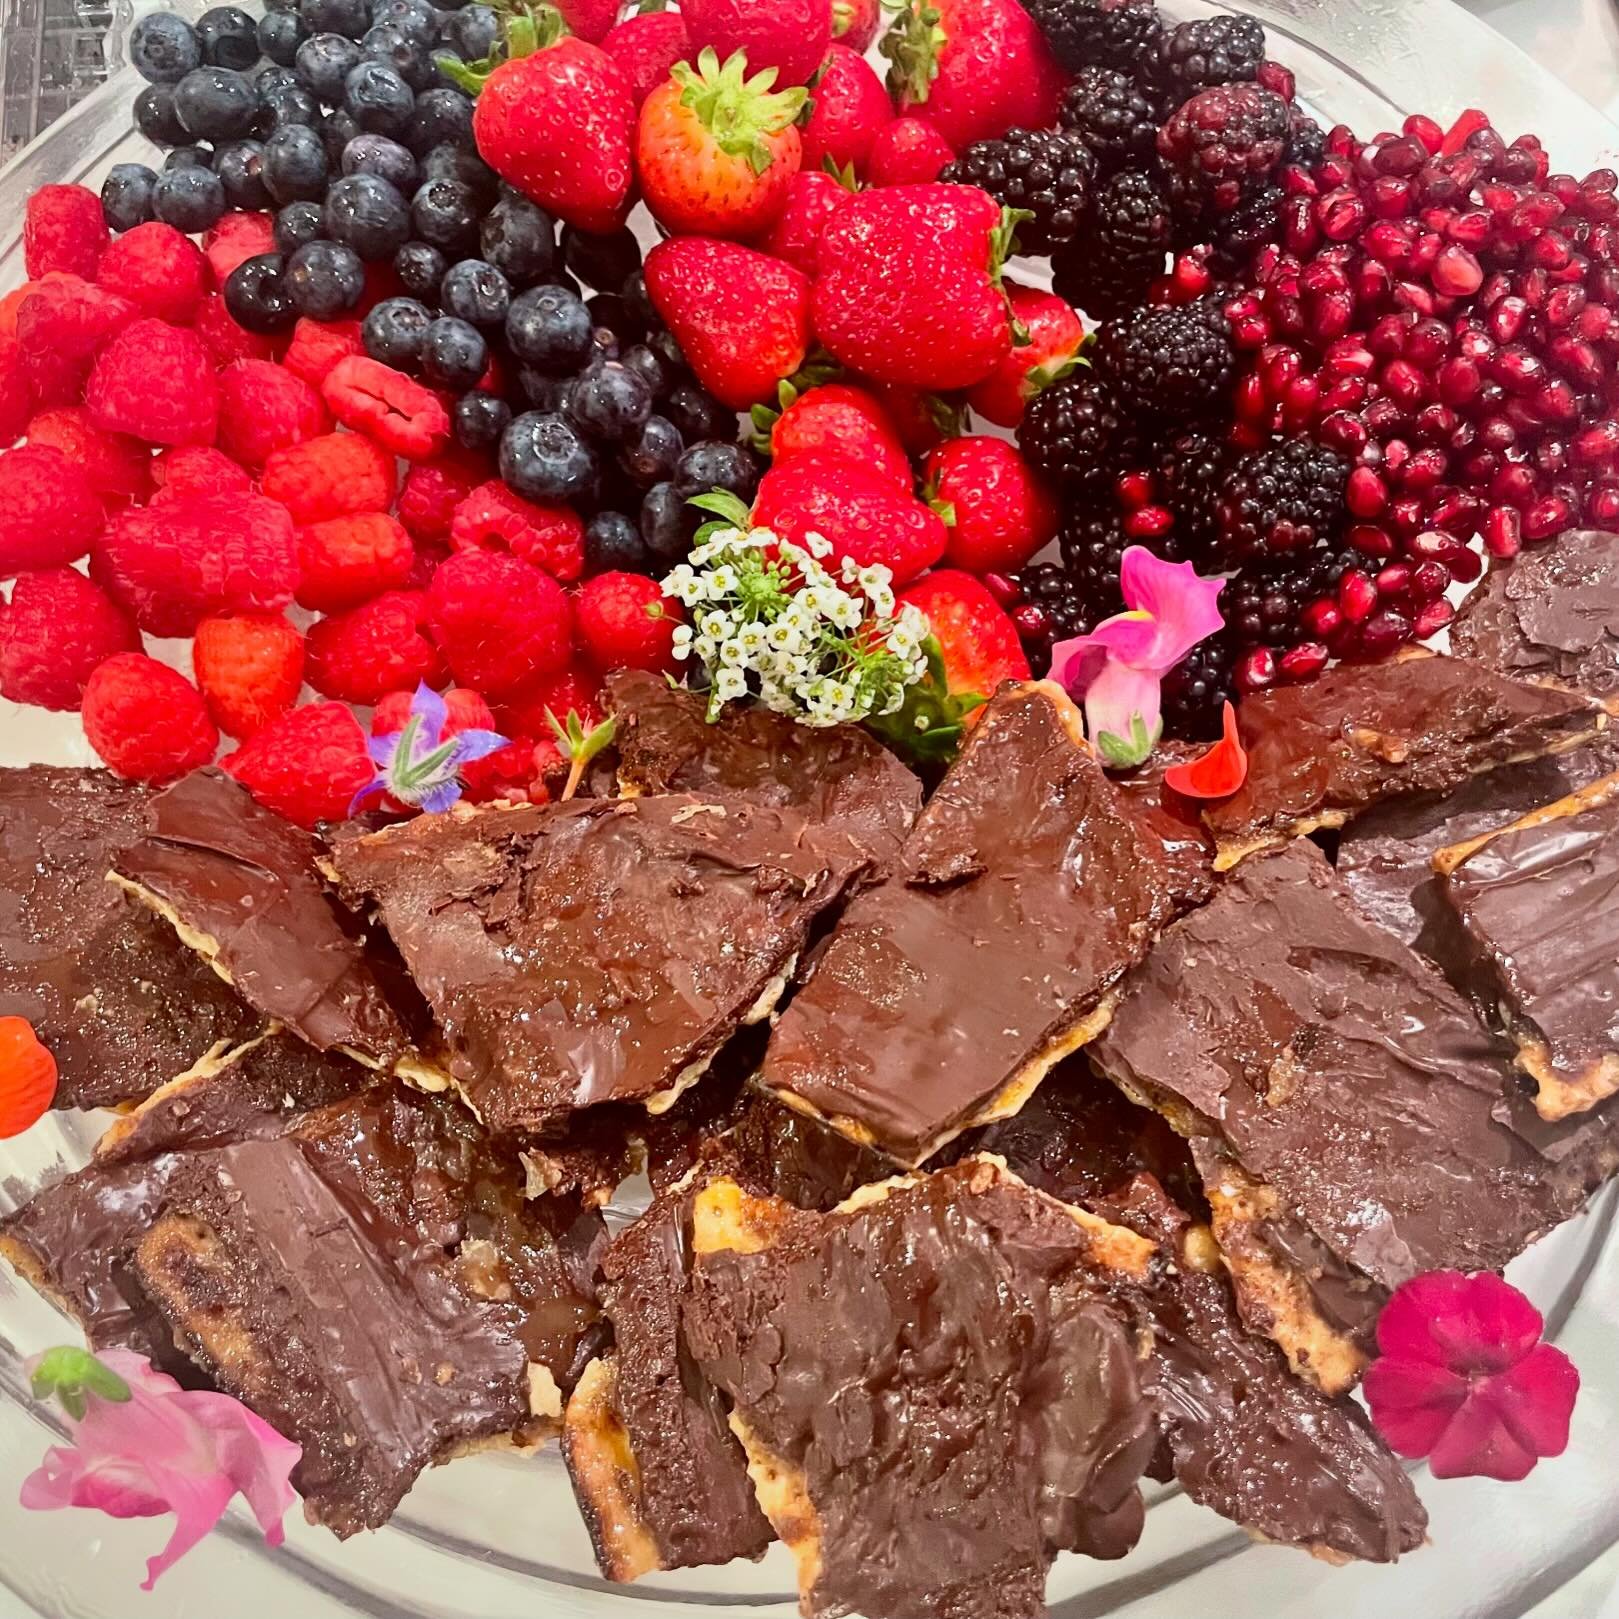 Delicious berries and matzo crack (toffee and chocolate matzo bark with sea salt) are great not just during Passover, but ANY time. Gnam gnam. #bluaubergine #fabulousfood #catering #privatechef #mealdelivery #dolci #dessertcourse